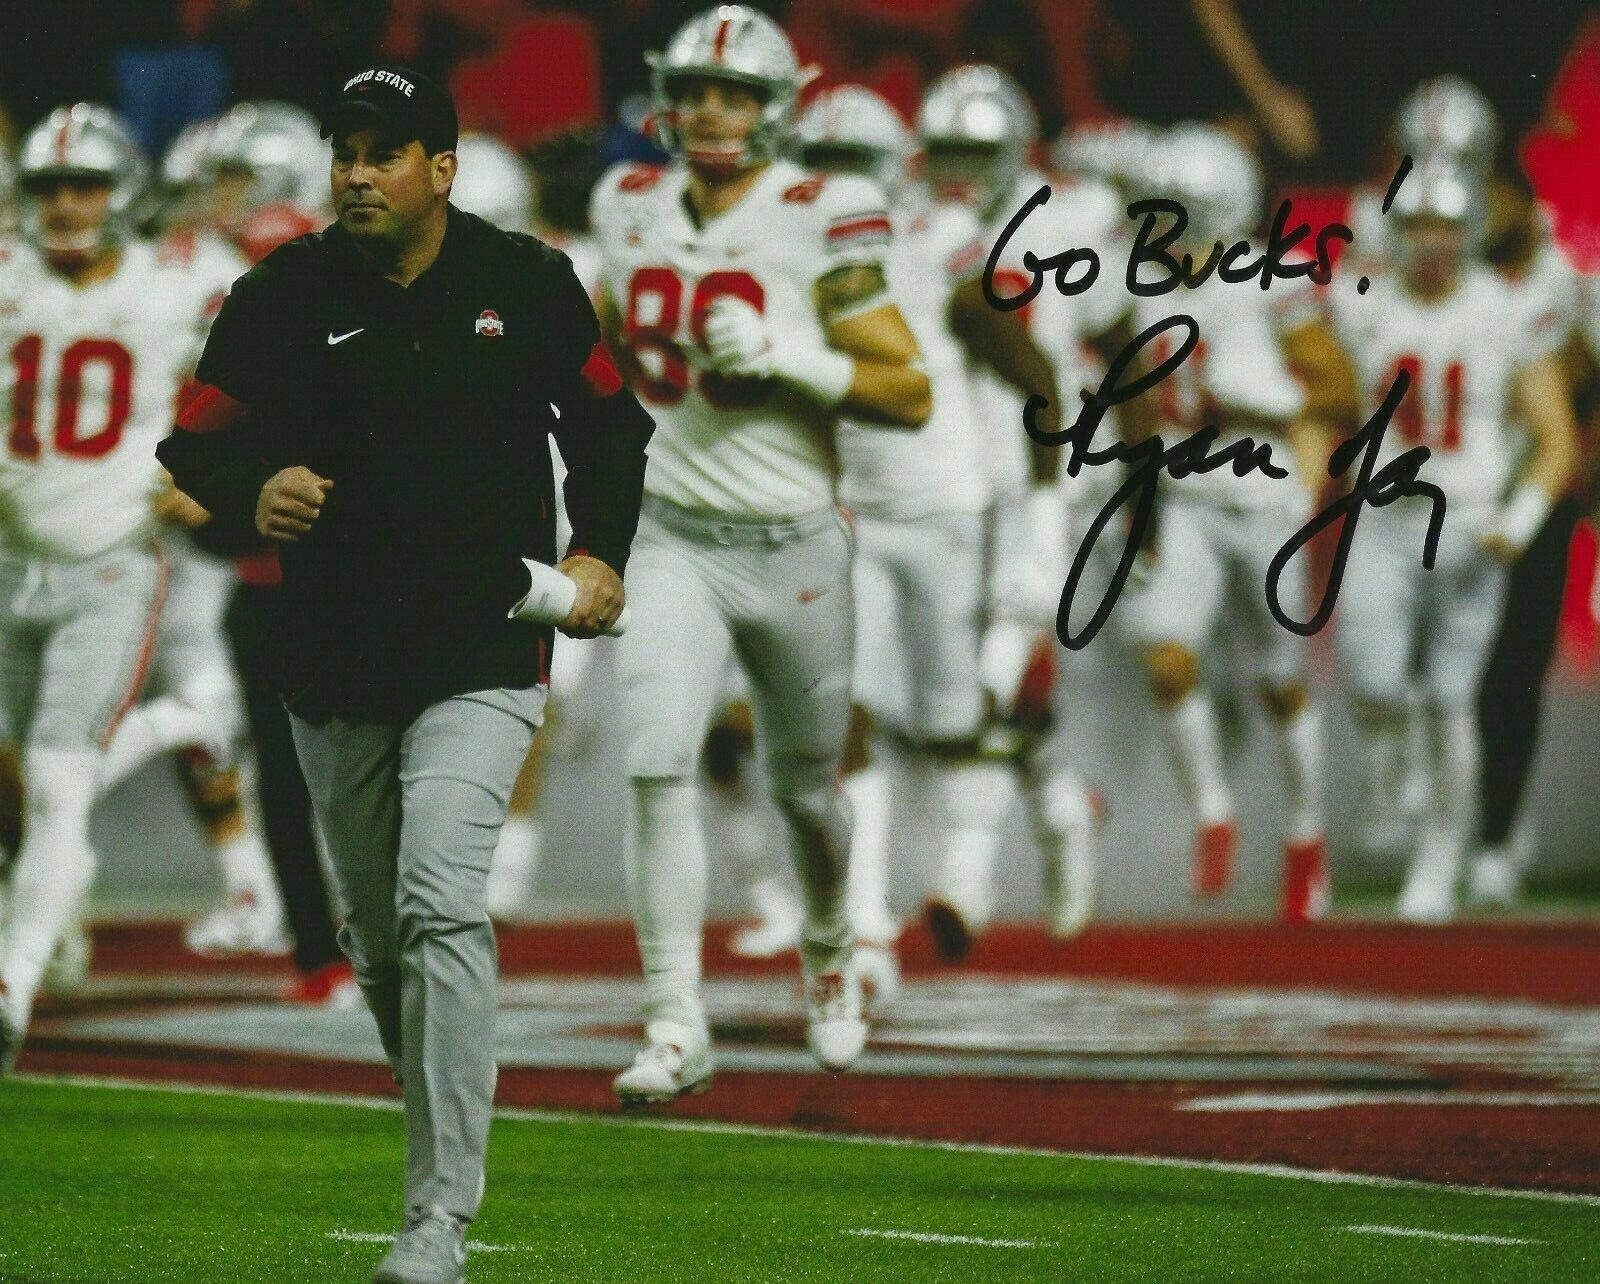 Ryan Day Autographed Signed 8x10 Photo Poster painting ( Ohio State Buckeyes ) REPRINT